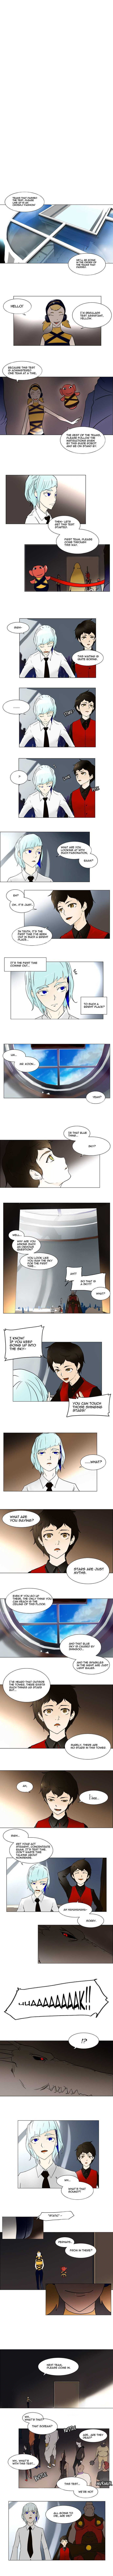 Tower of God 11